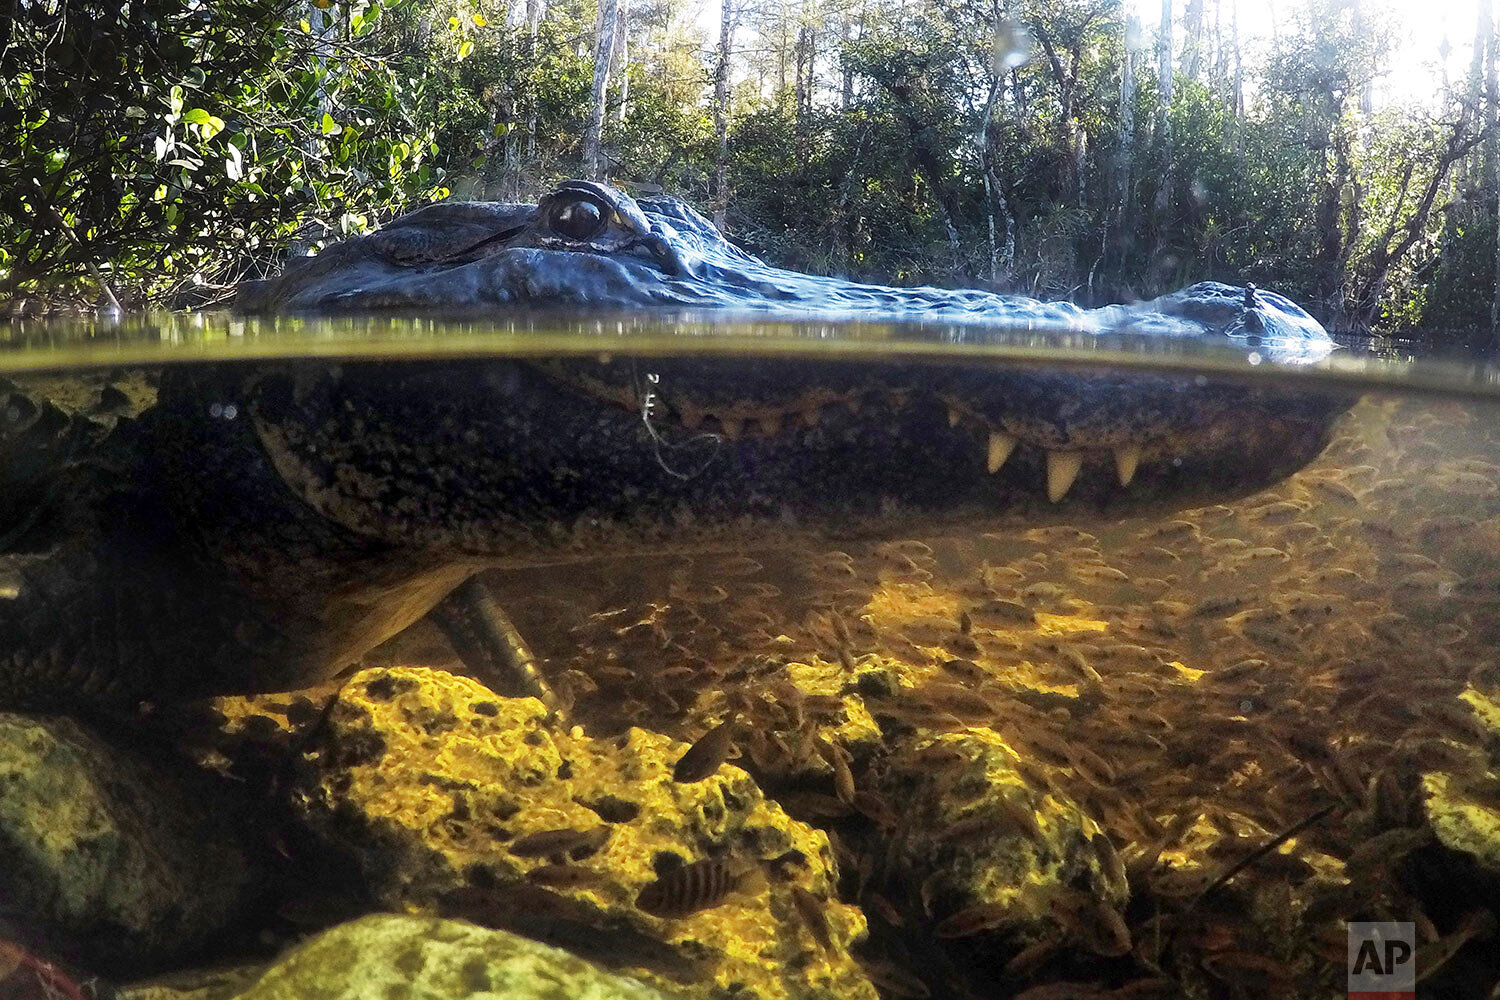  An alligator ignores the small fish swimming nearby as it awaits its next opportunity for a meal in the Big Cypress National Preserve in Florida on Oct. 30, 2019. A fishing line dangles from the reptile's mouth. (AP Photo/Robert F. Bukaty) 